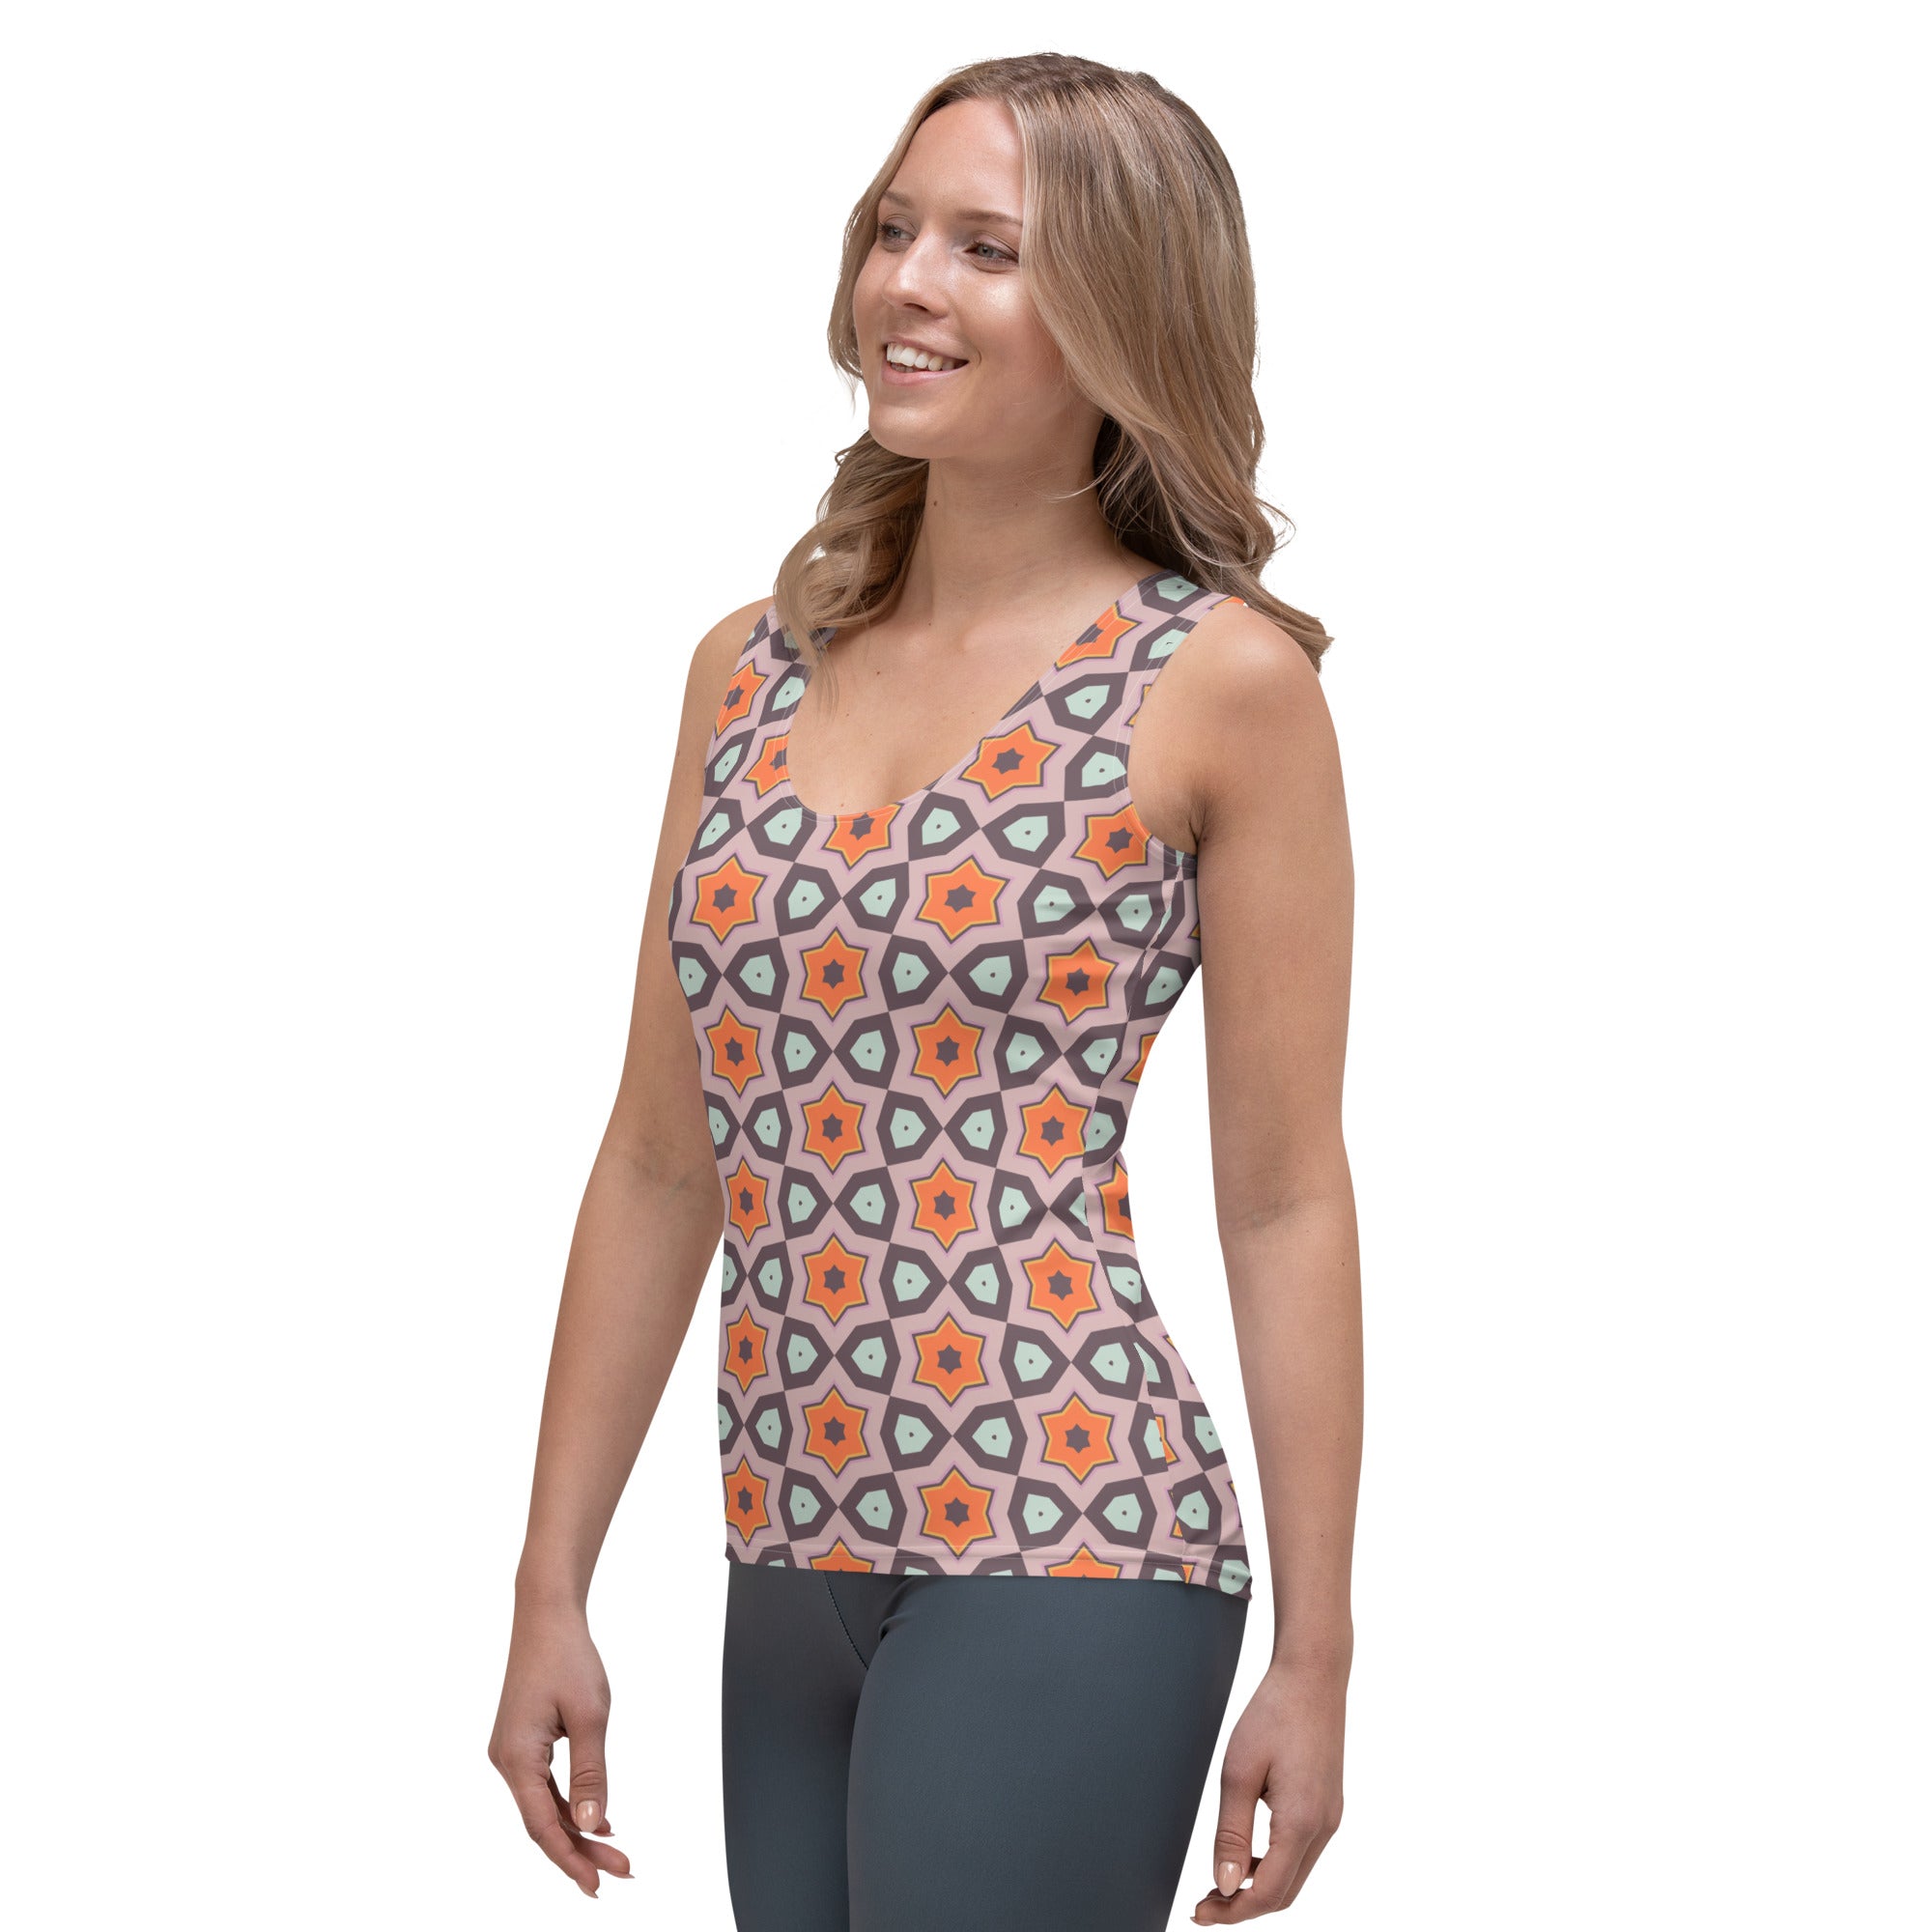 Comfortable Jungle Fever Women's Tank Top in action